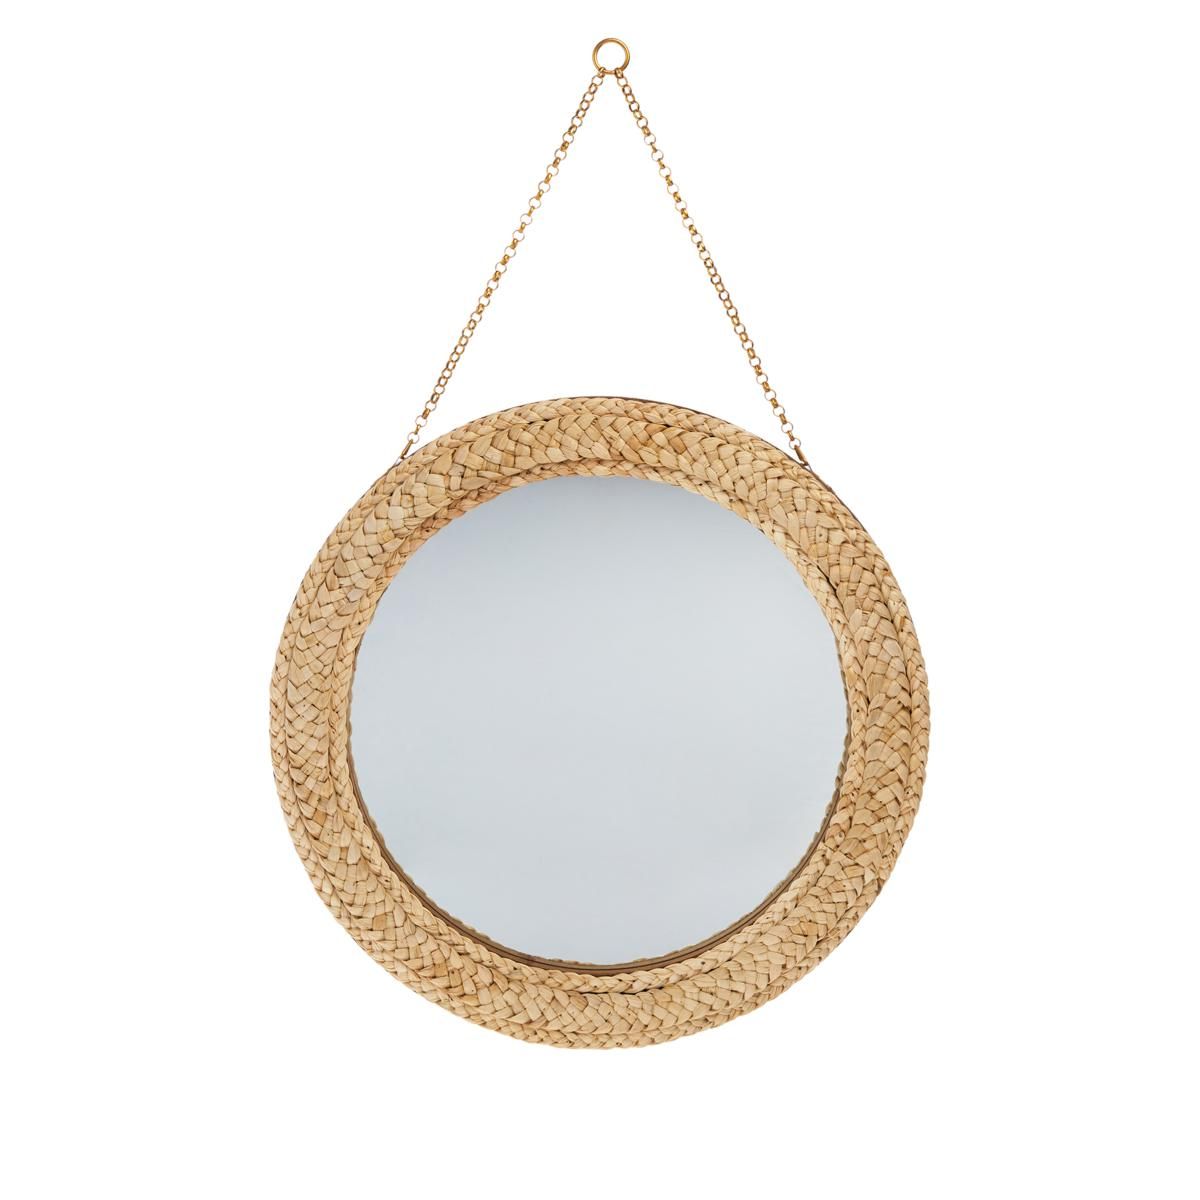 Clover by Jo 17" Wood Mirror with Chain - 20276407 | HSN | HSN